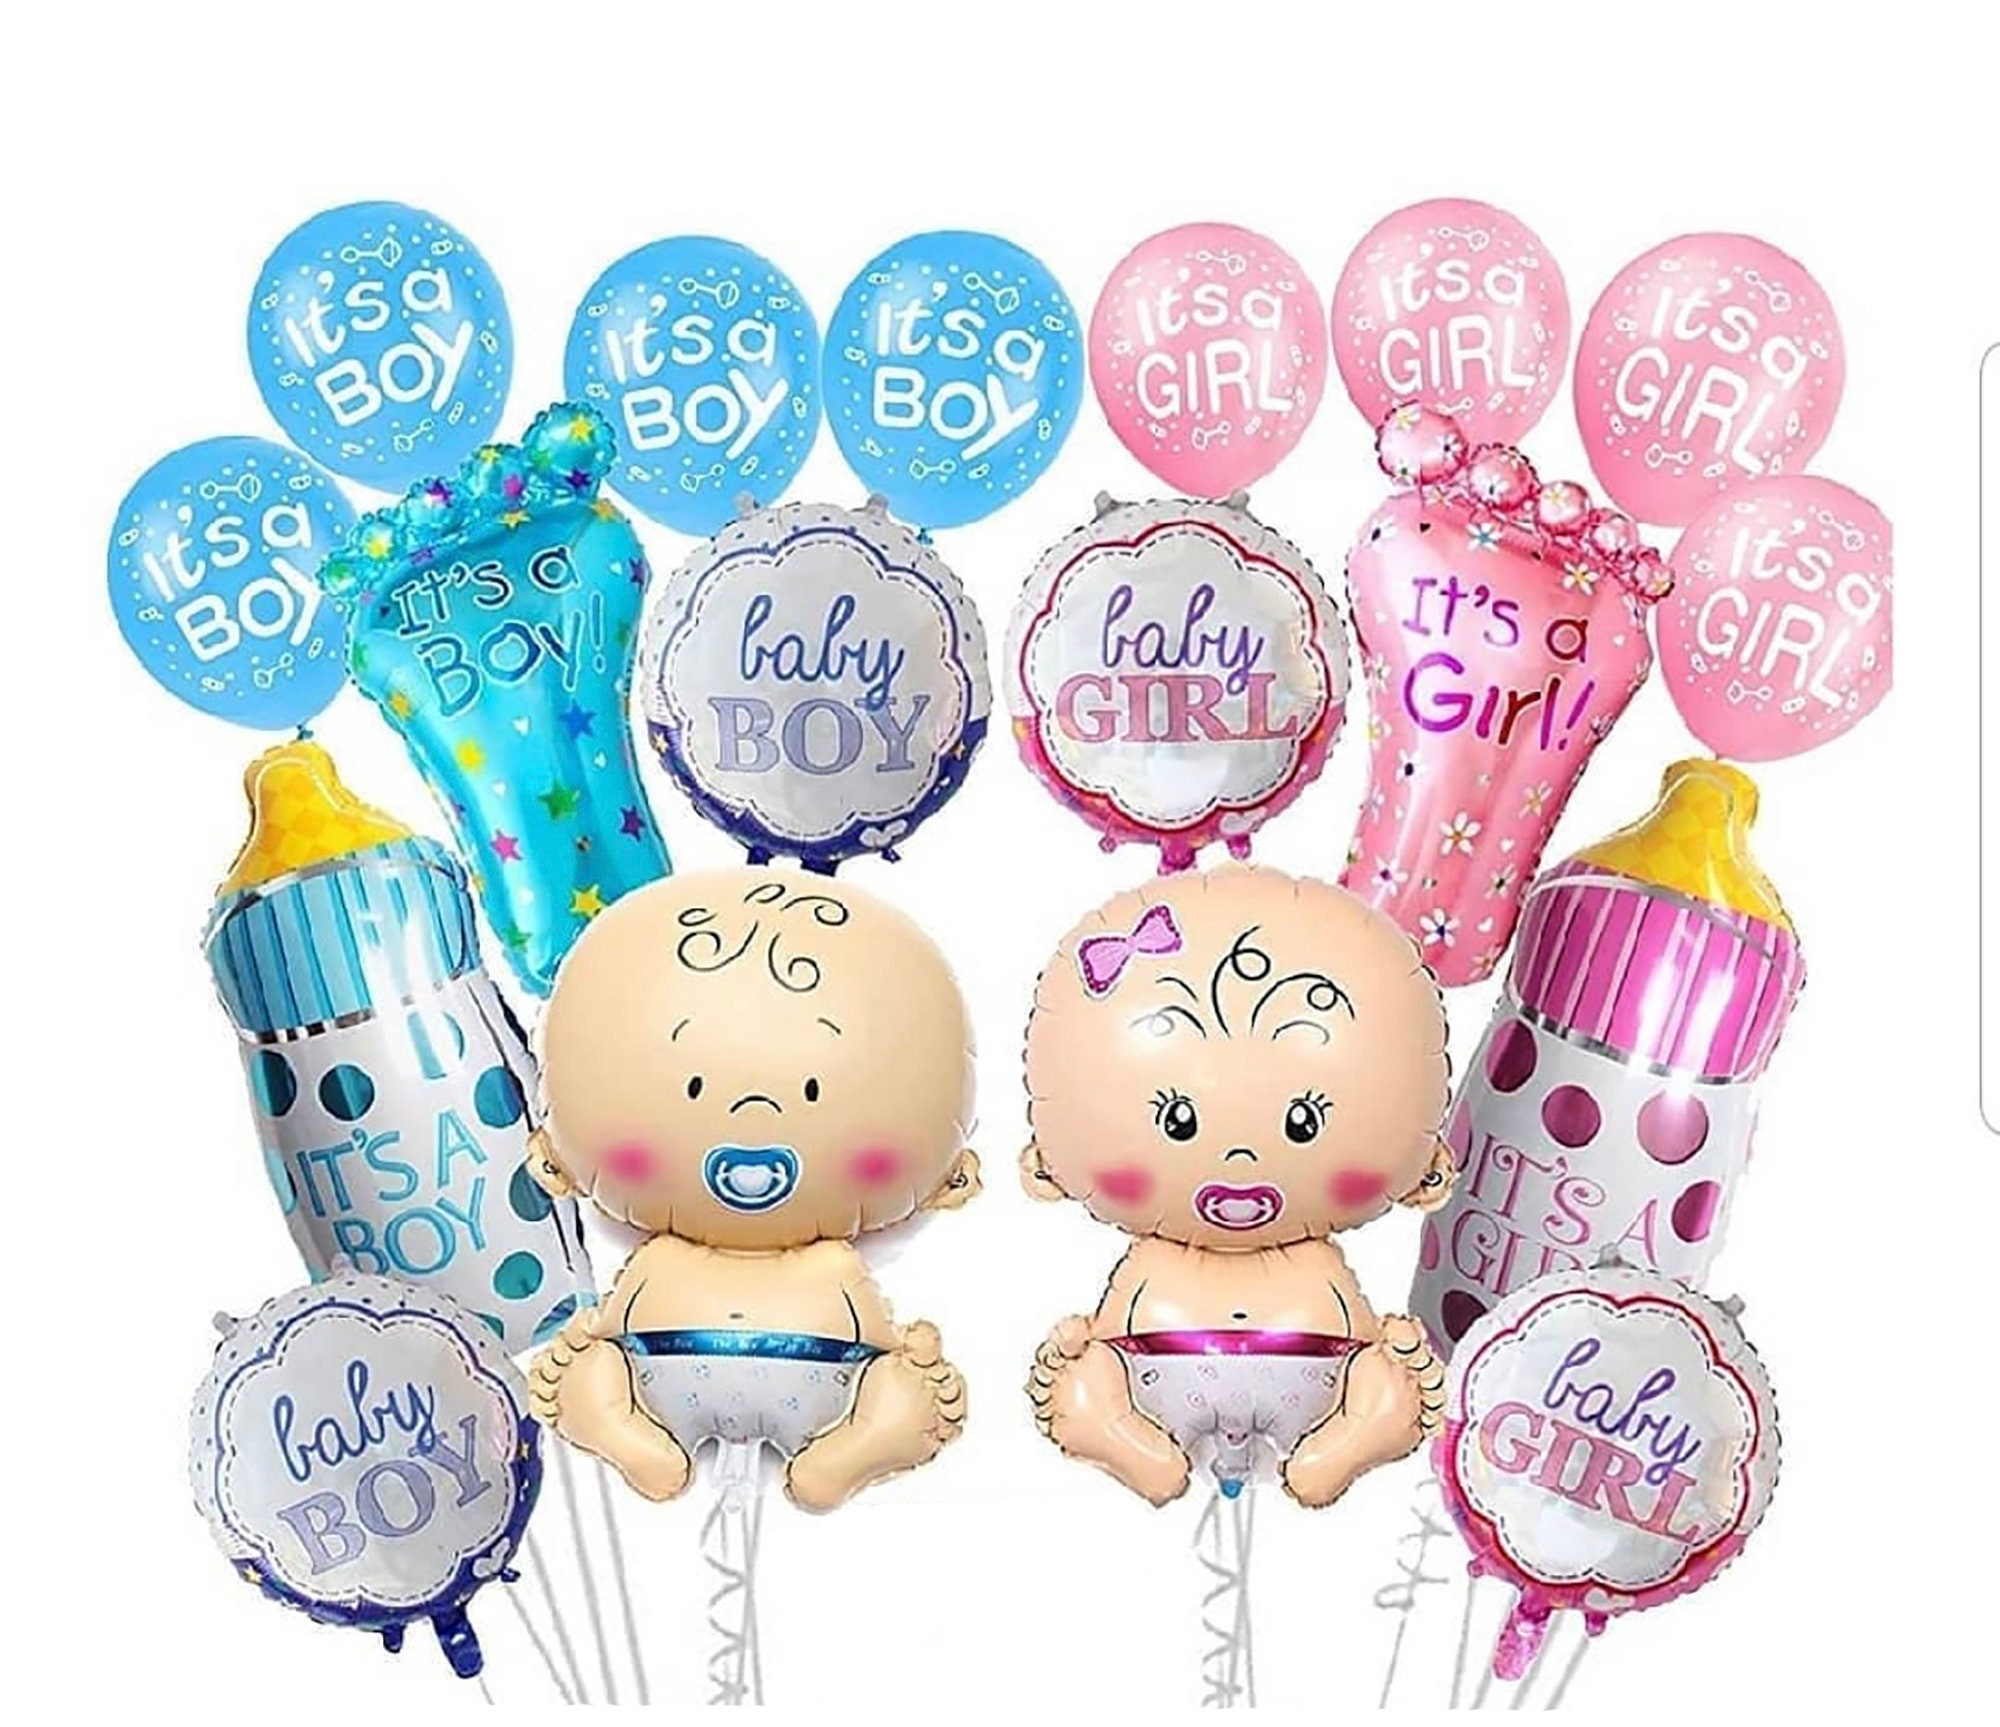 It's A Boy Balloon or It's A Girl Balloon, Baby Shower Balloons, Boy's Baby  Shower, Gender Reveal Party, Baby Shower Party Decoration 